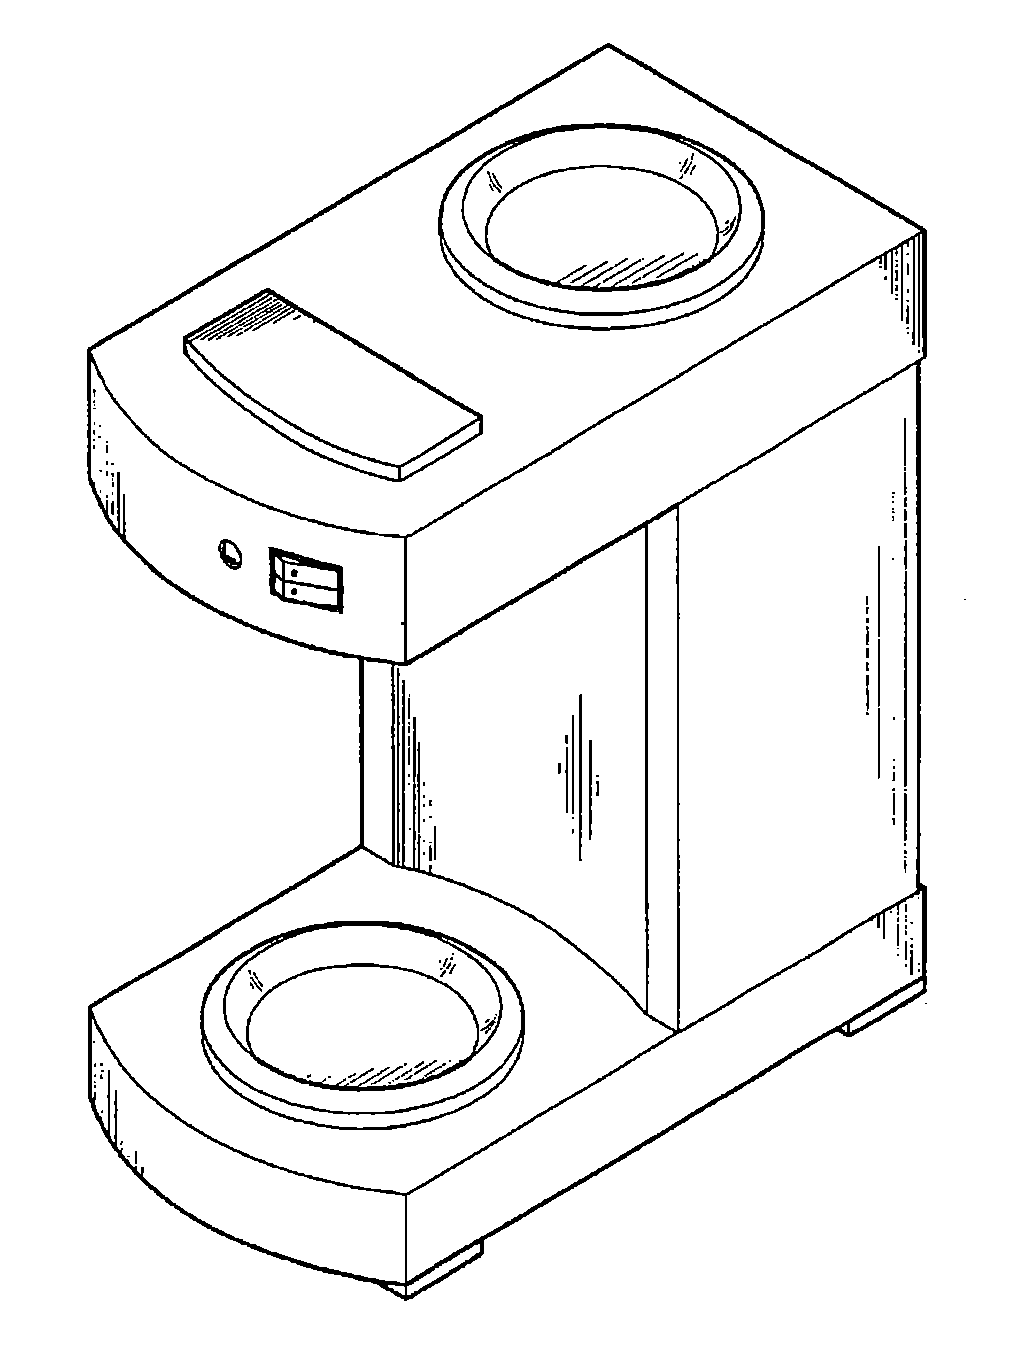 Example of a beverage dispenser with a support or overflowtray for receiving vessel.   
